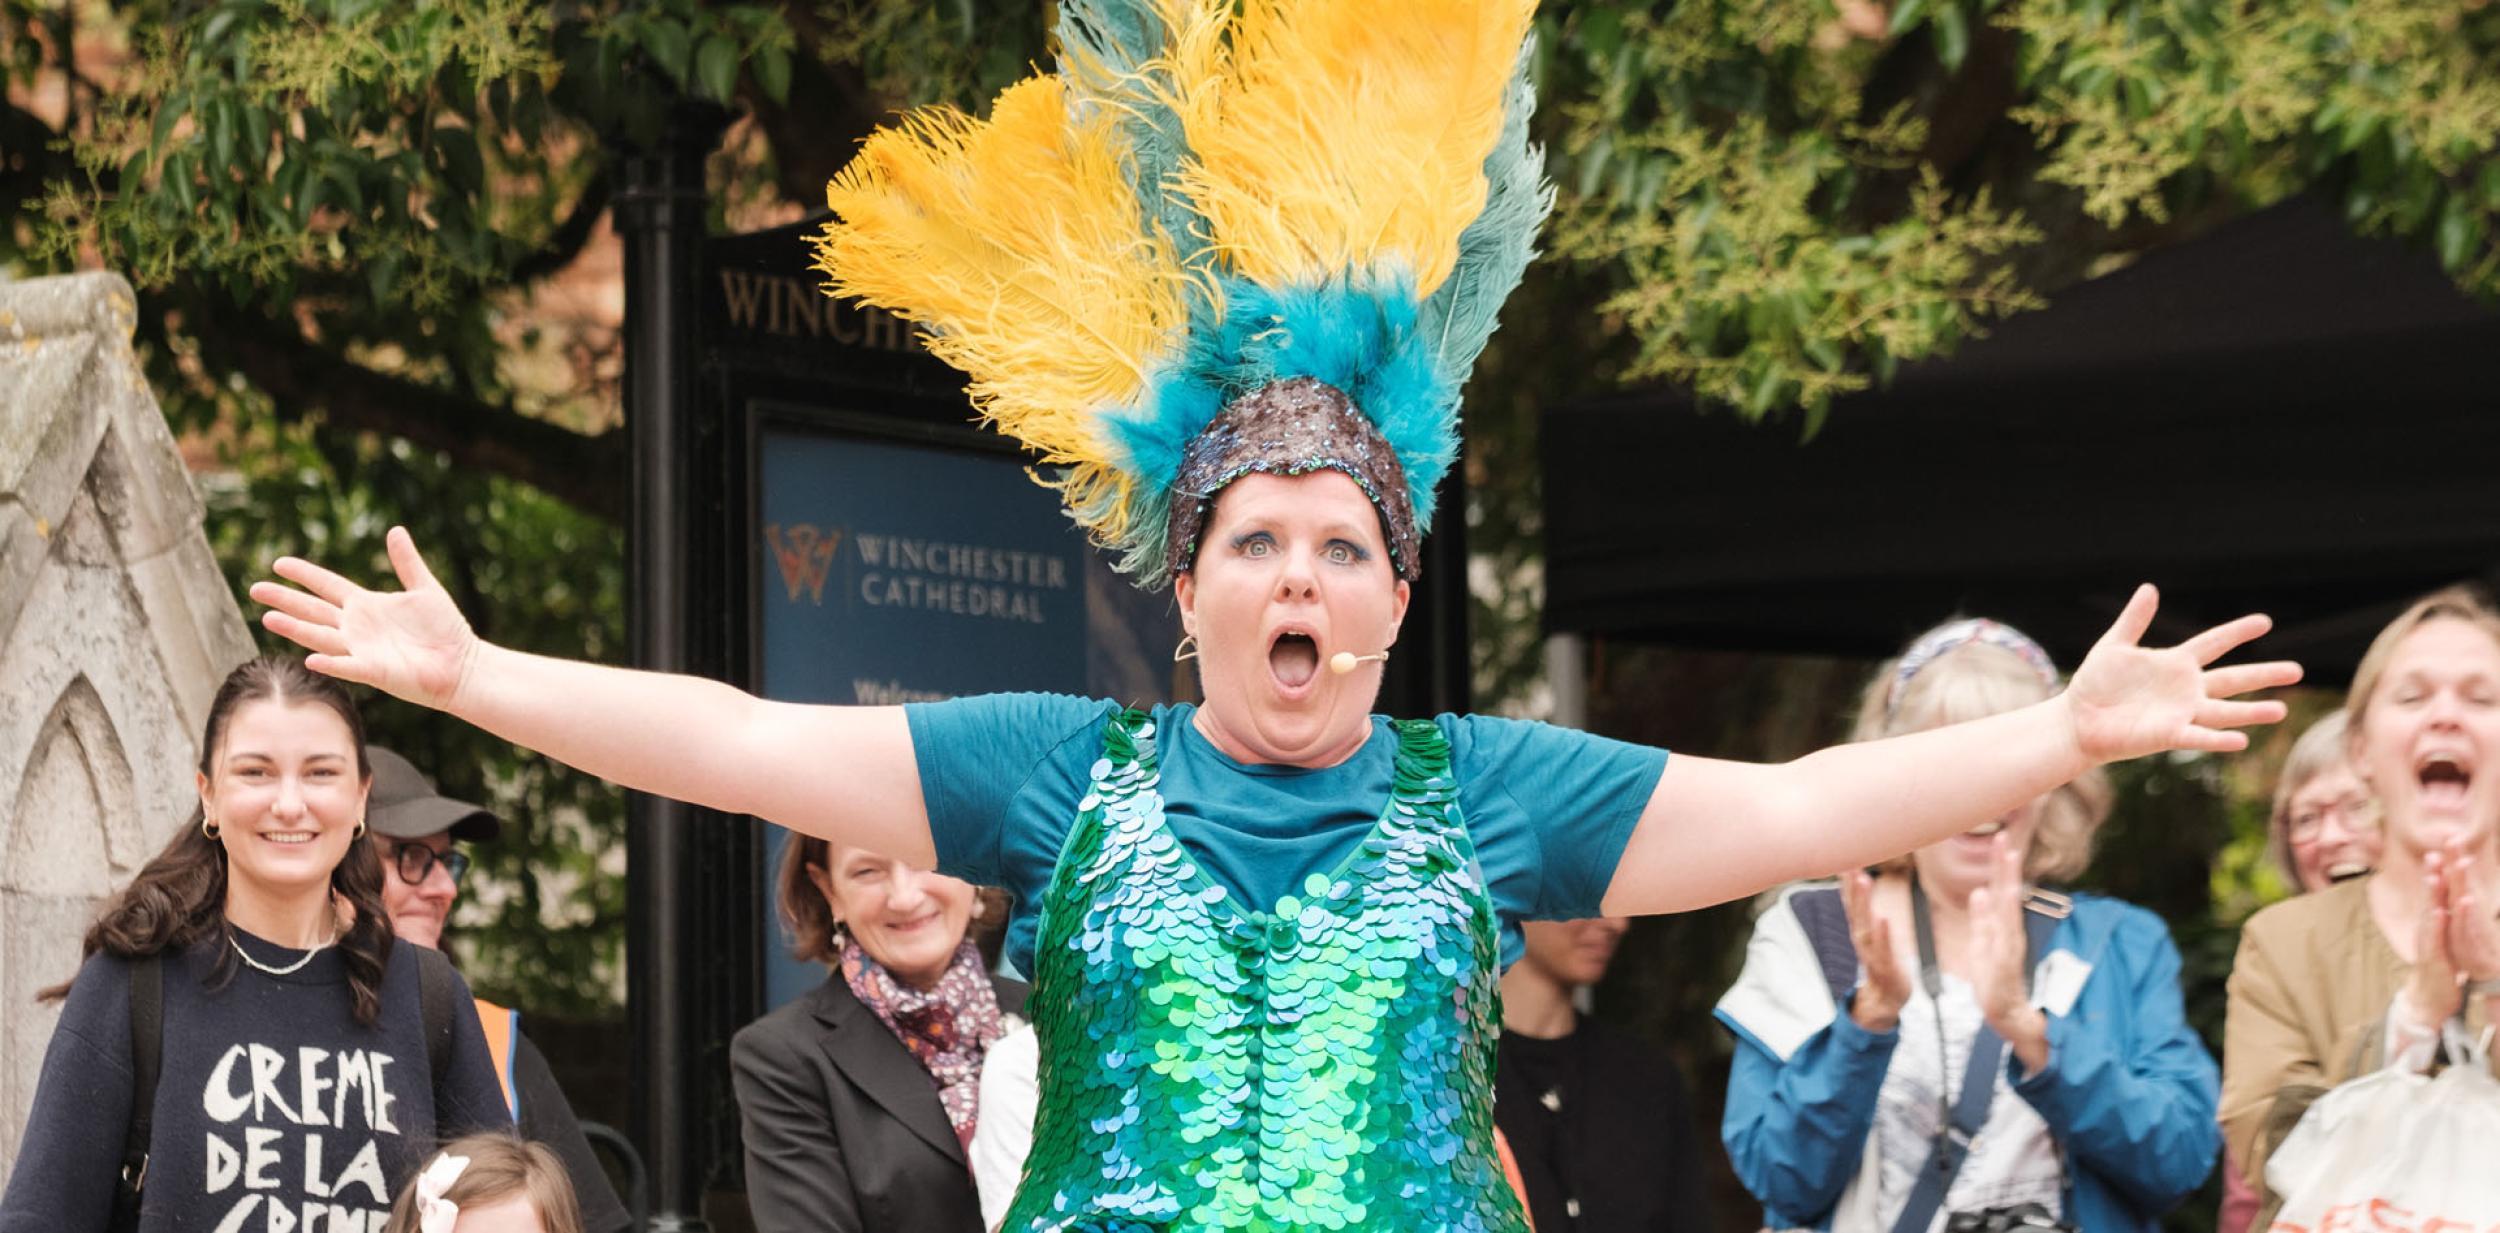 A performer in a sparkly costume and headdress performing to an audience outdoors